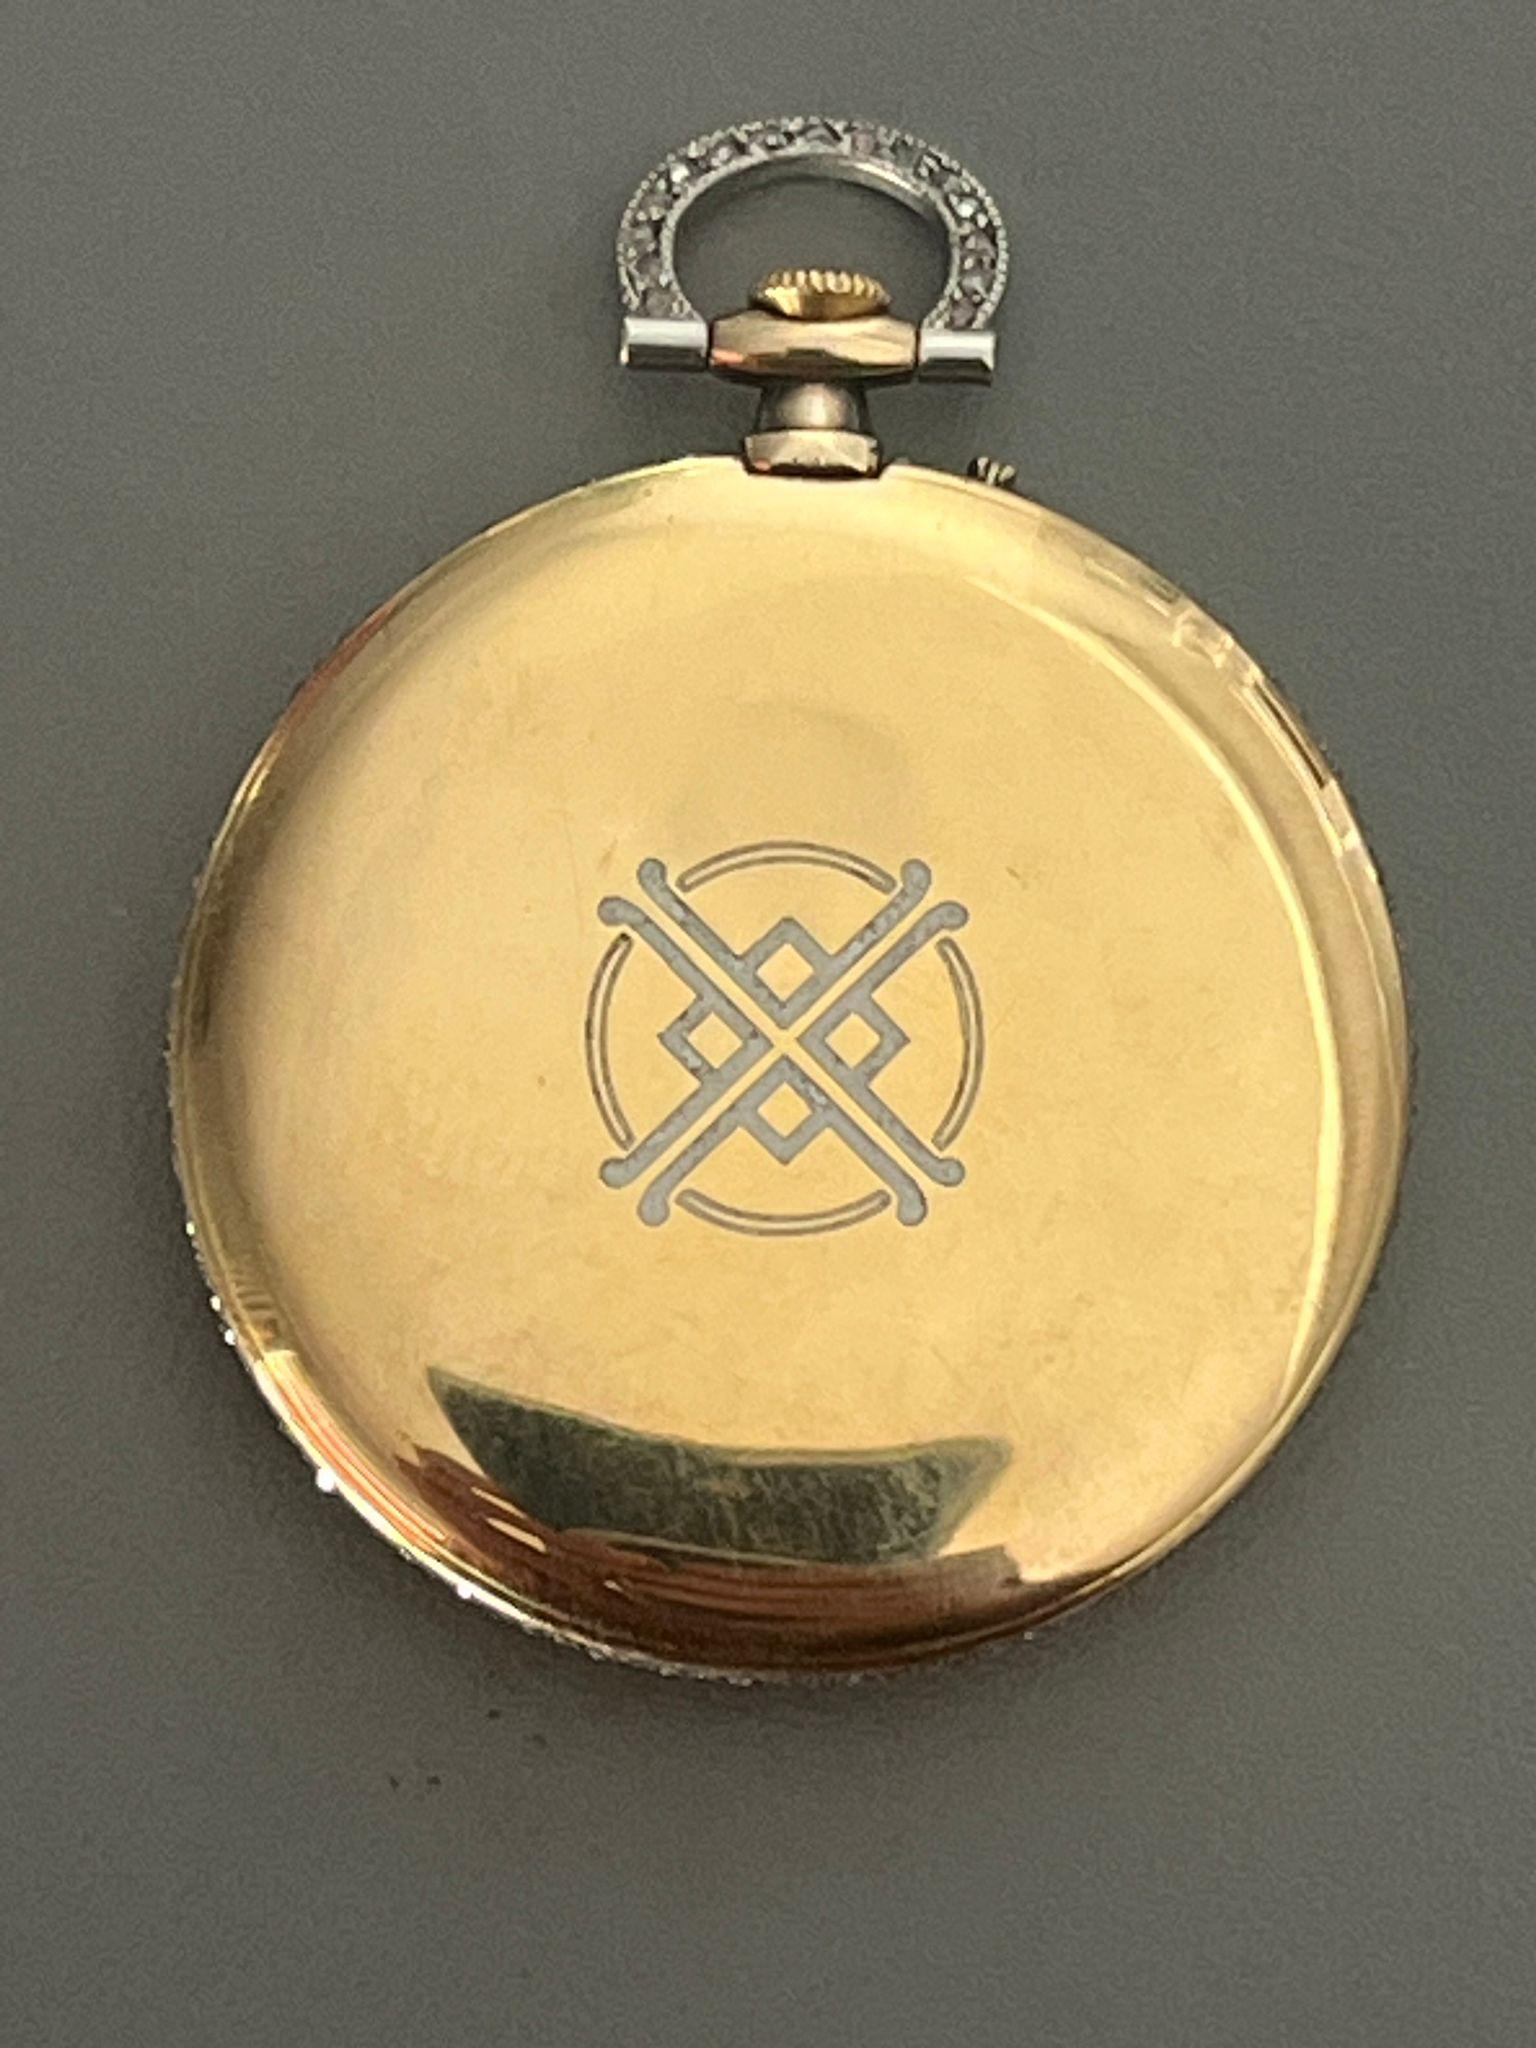 A remarkable 18kt yellow gold and platinum pocket watch by Cartier, dating back to the Belle �Époque era, circa 1907. This exquisite timepiece is not only a functional accessory but also a valuable piece of history and craftsmanship.
Cartier is a